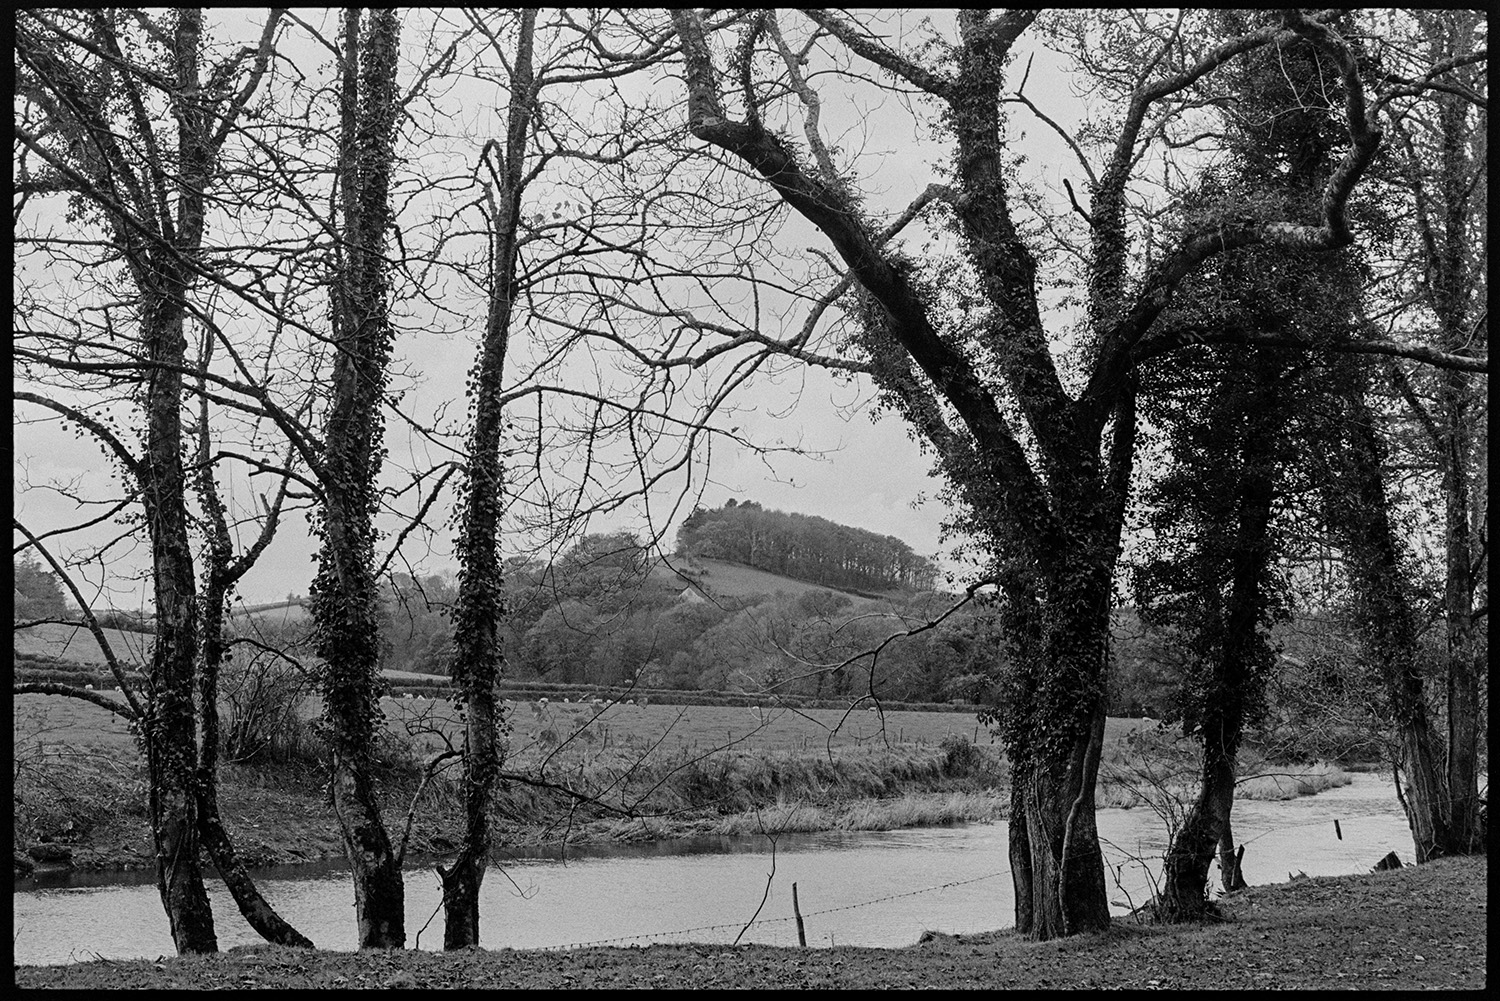 Landscapes with farm and trees by river. 
[The River Torridge running past fields and trees at Ashwell, Dolton. A hill with a wooded area can be seen in the background.]